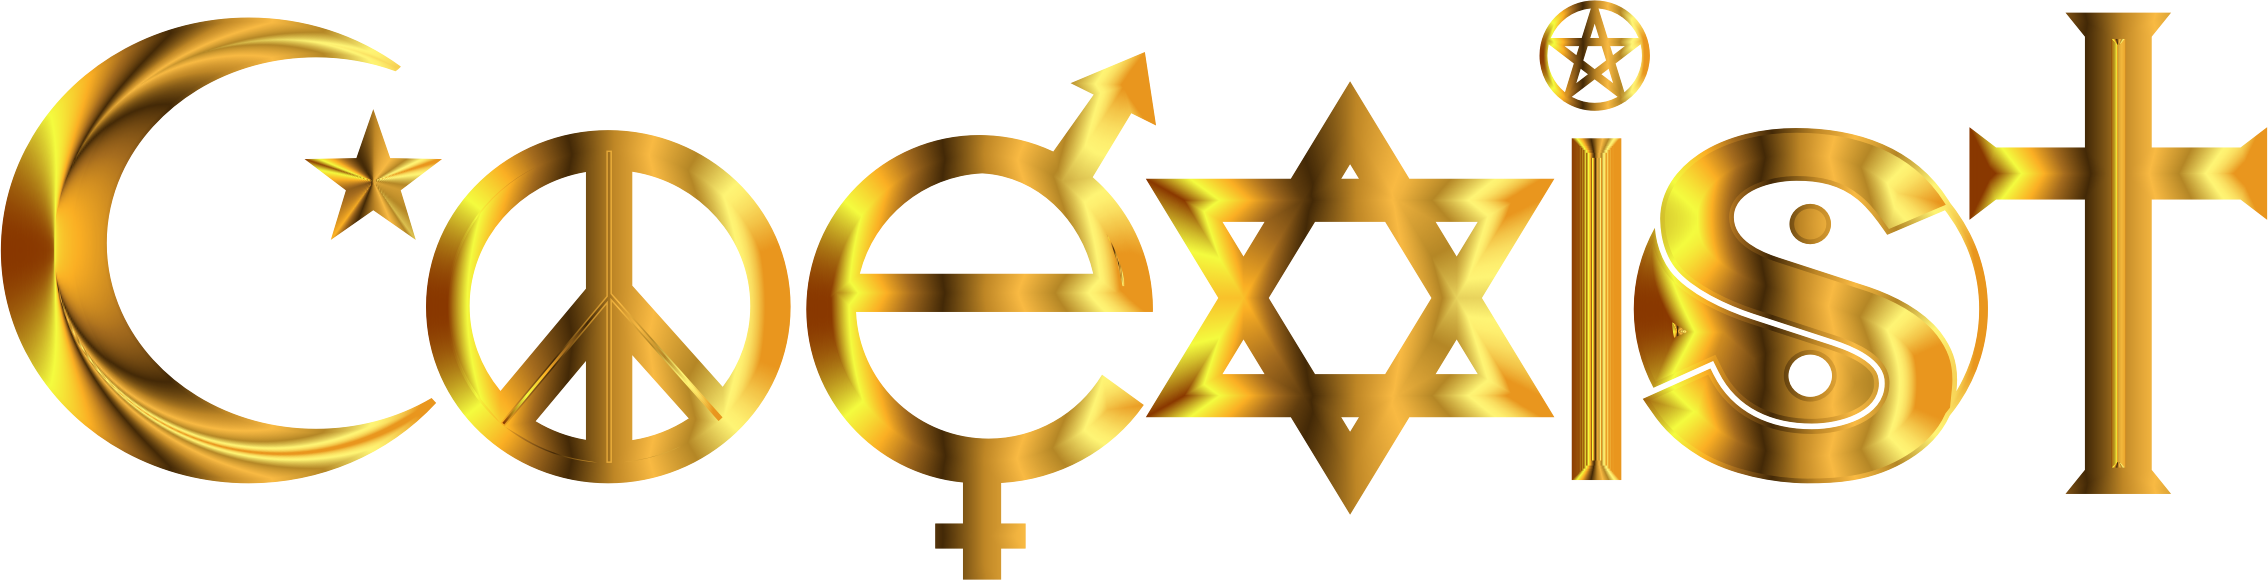 Free Coexist Cliparts, Download Free Clip Art, Free Clip Art on.